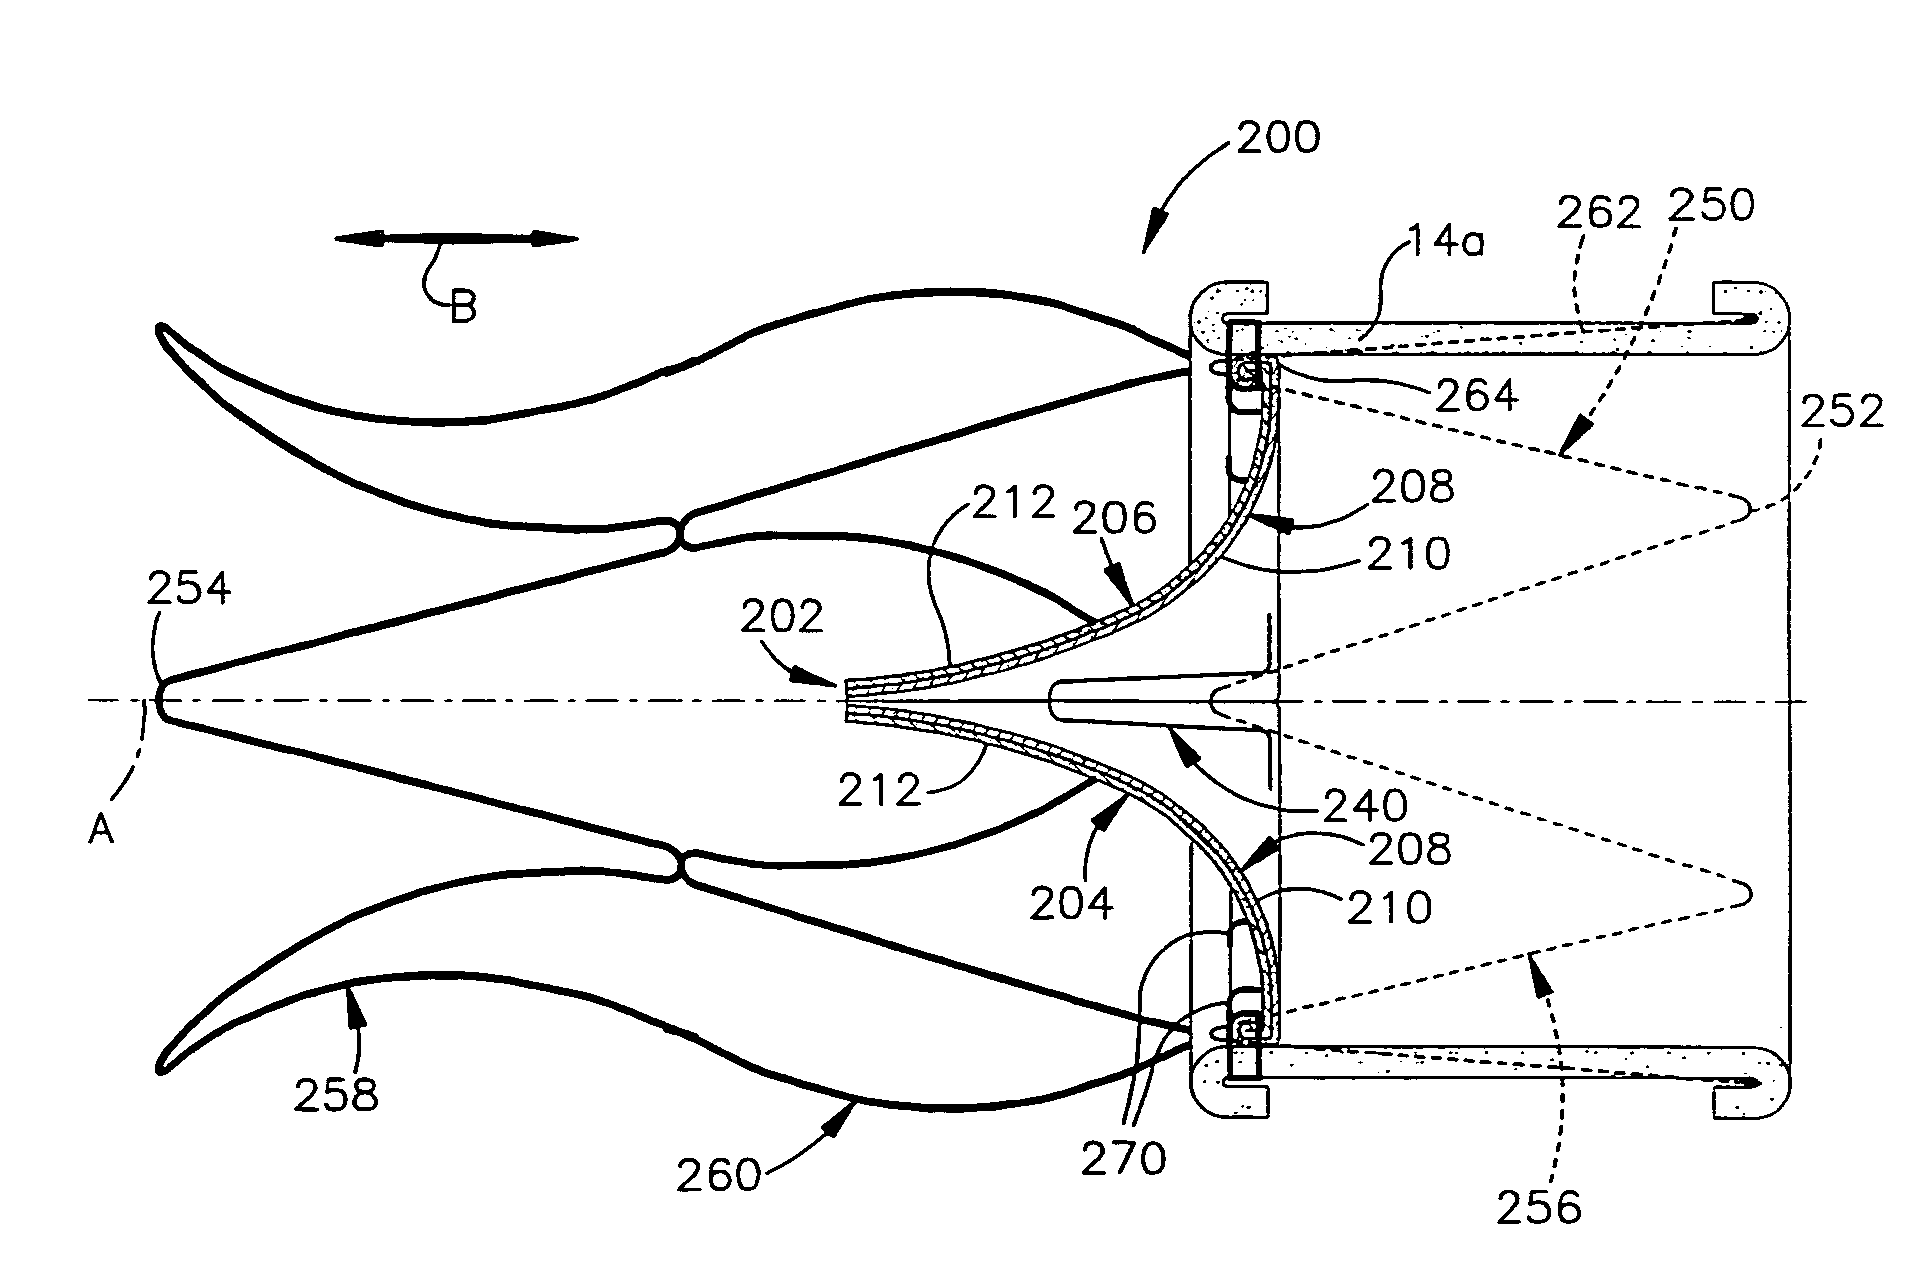 Prosthetic cardiac value and method for making same